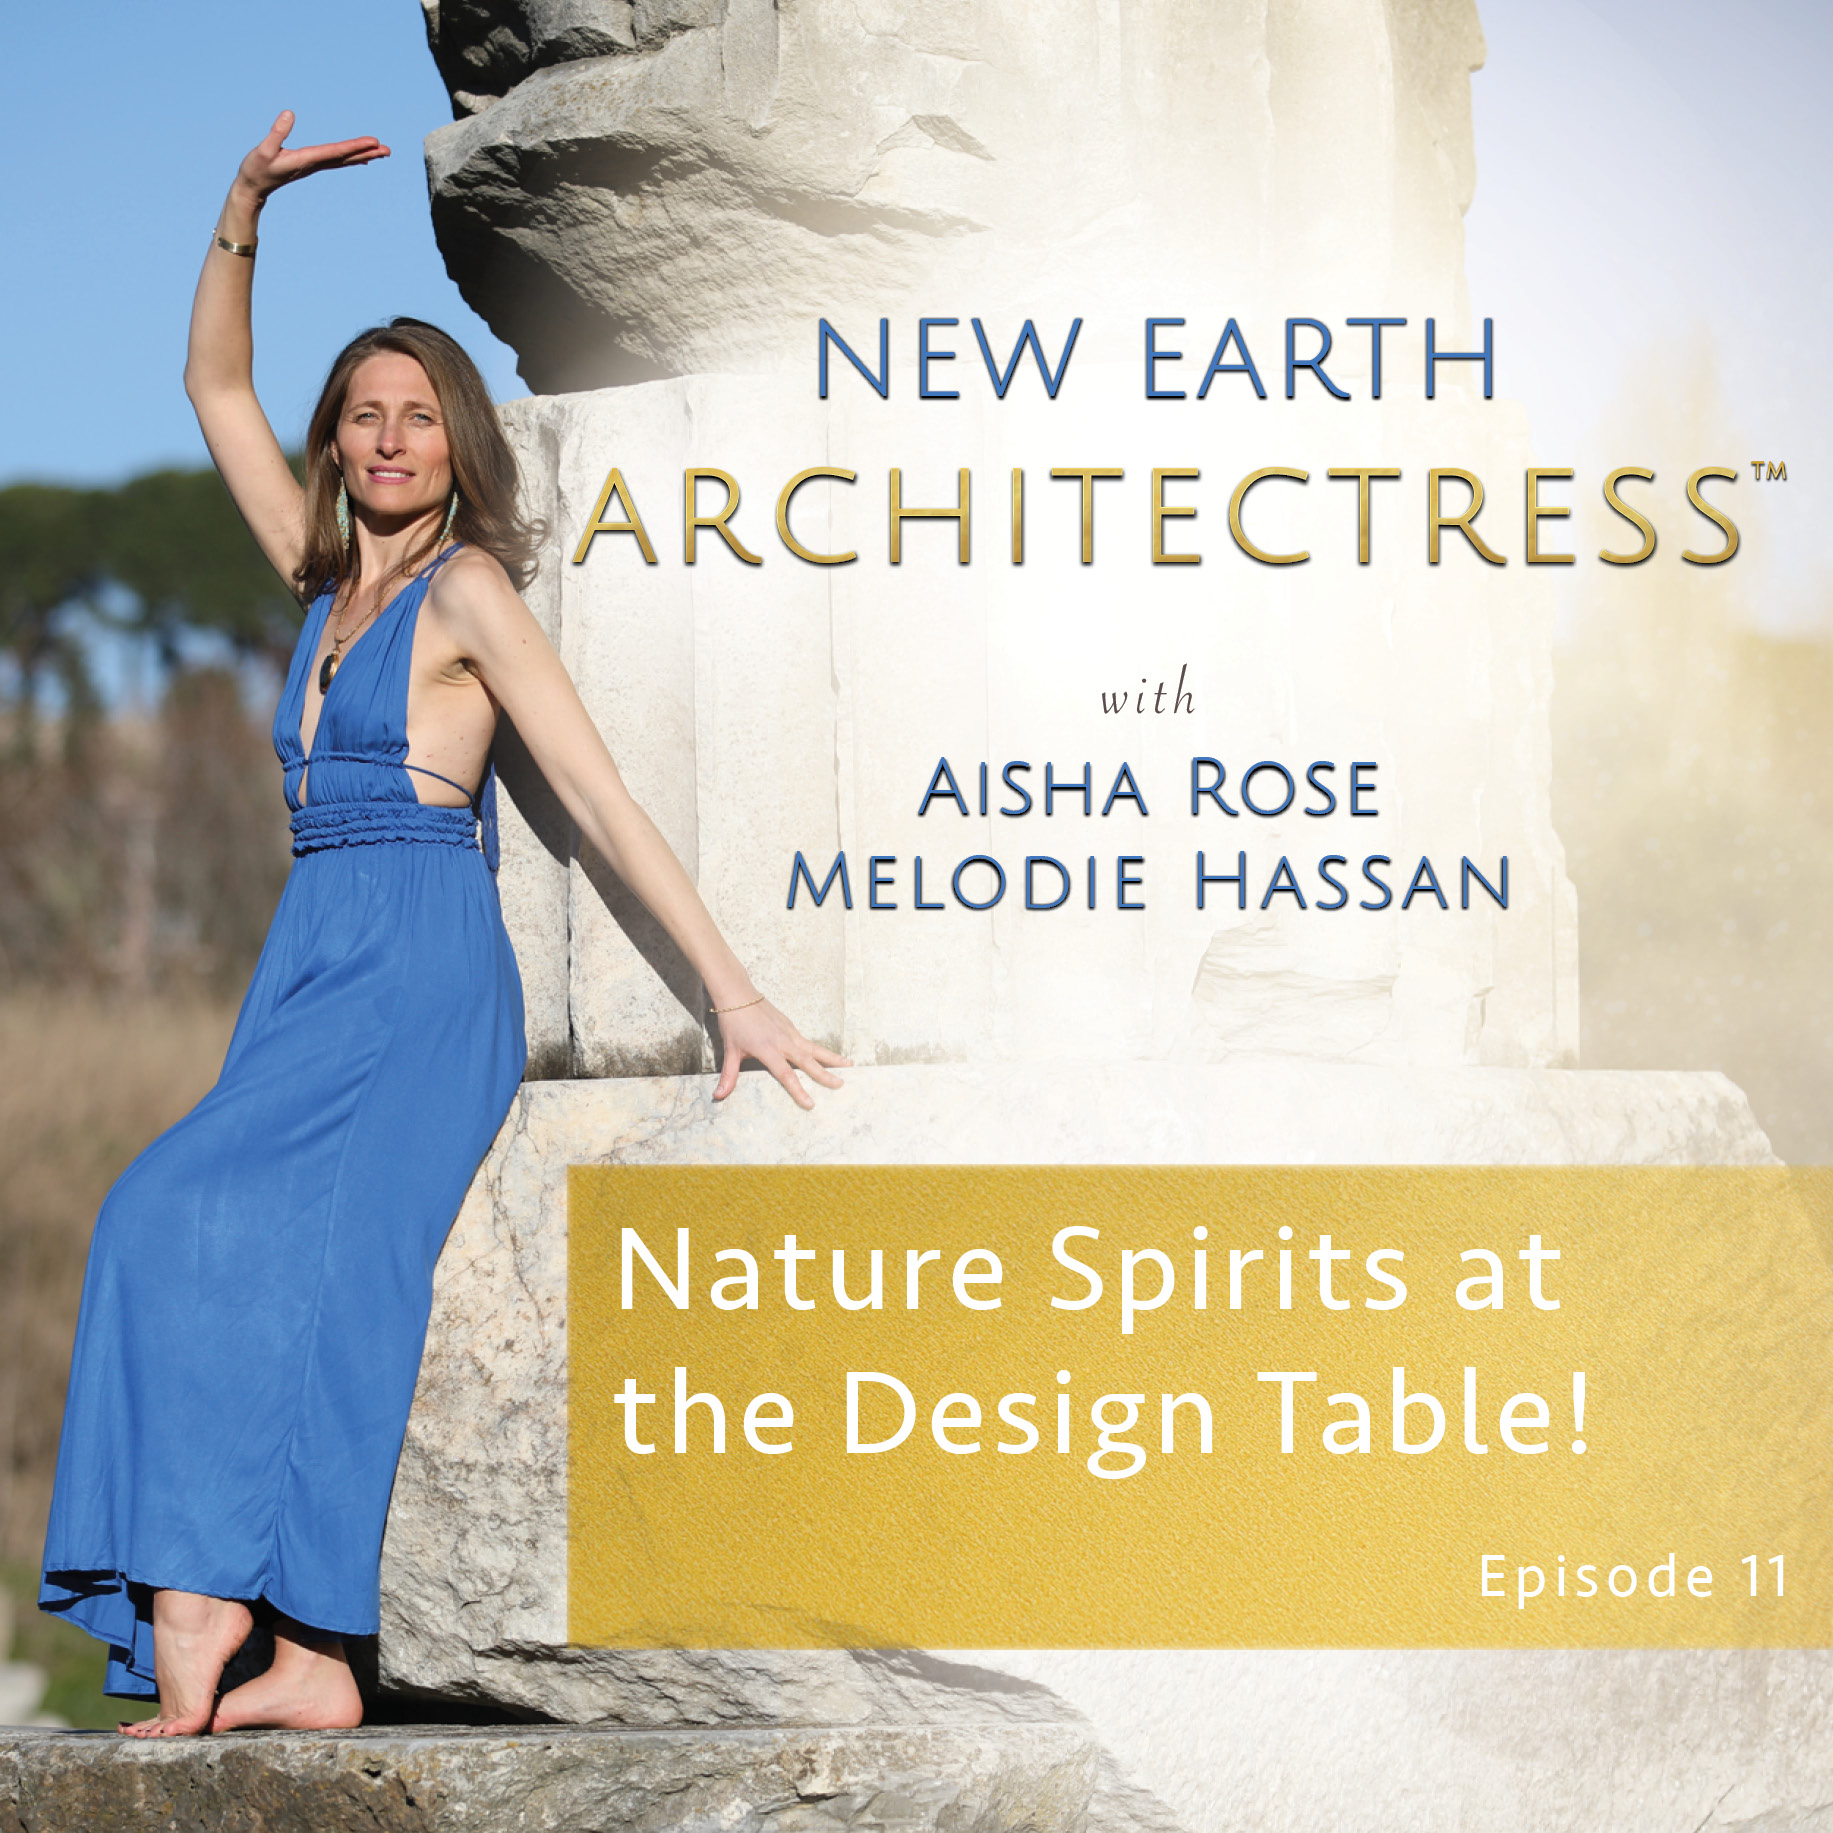 Artwork for podcast New Earth Architectress™